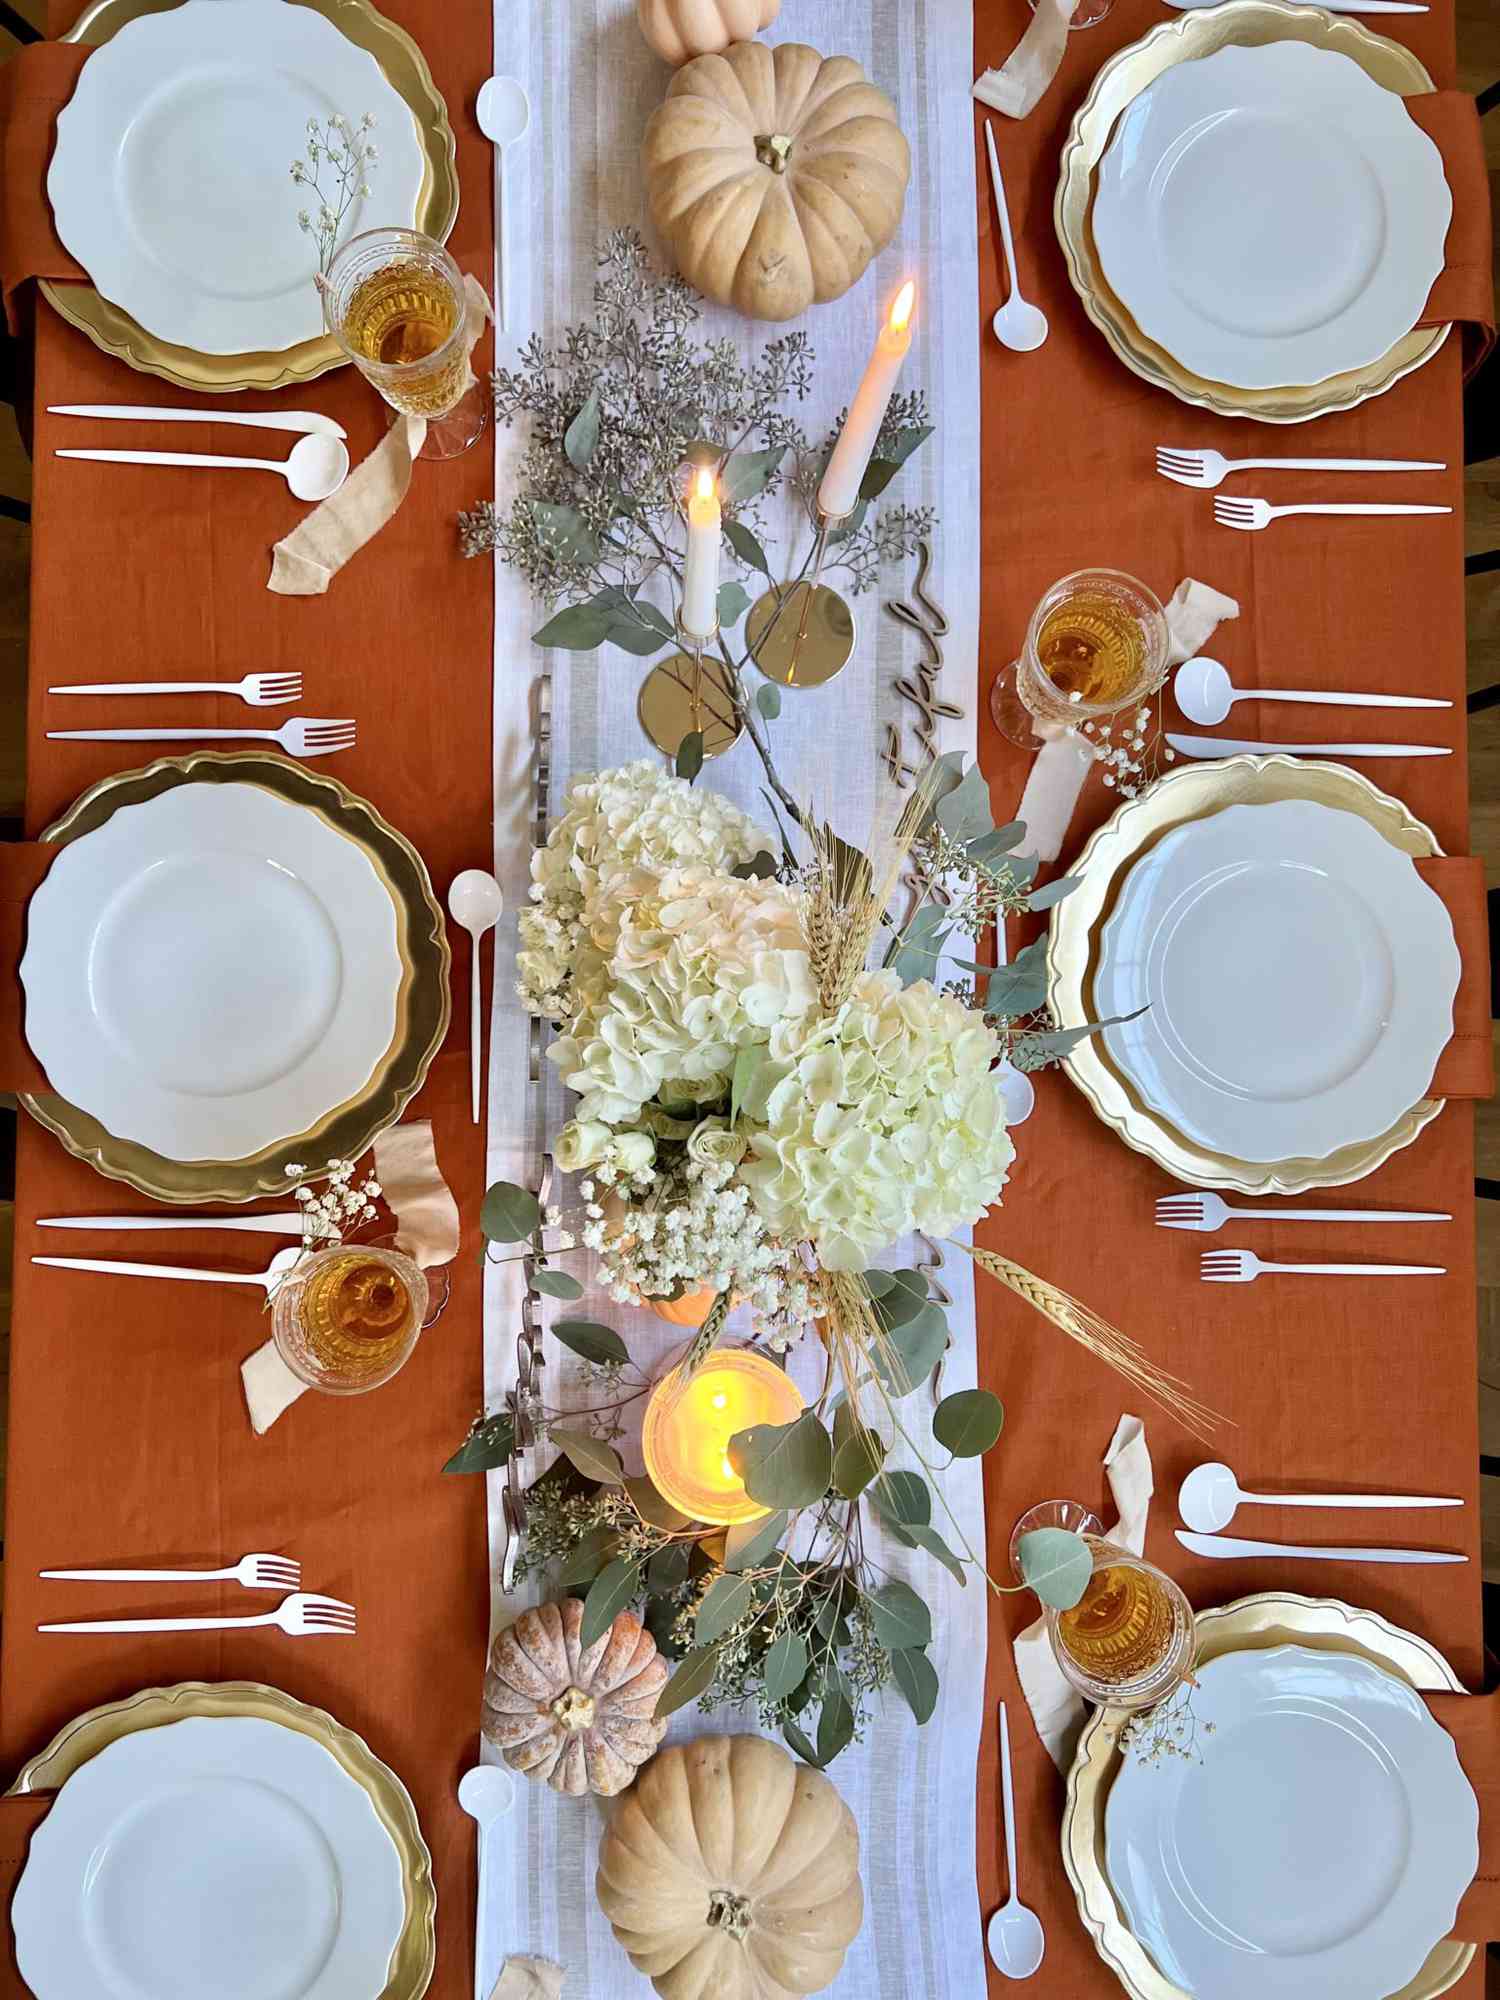 Overhead of a Thanksgiving-themed dinner table with decorative centerpieces and place settings